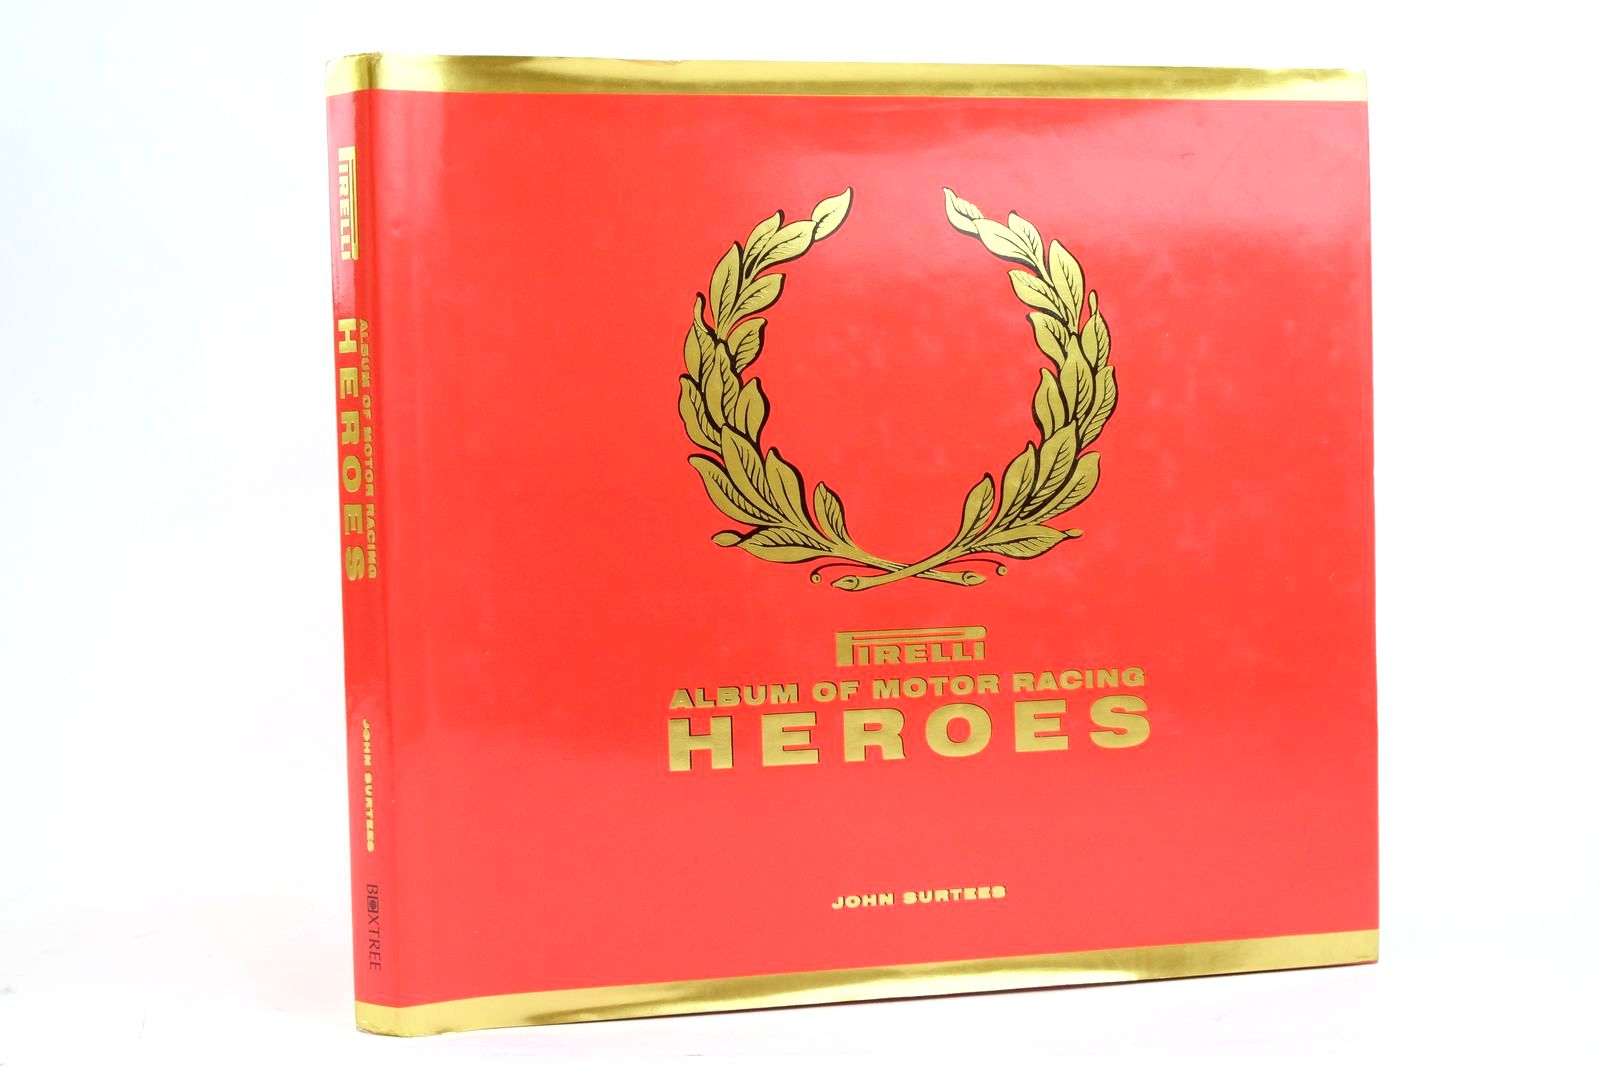 Photo of PIRELLI ALBUM OF MOTOR RACING HEROES written by Surtees, John published by Boxtree Limited (STOCK CODE: 2136075)  for sale by Stella & Rose's Books